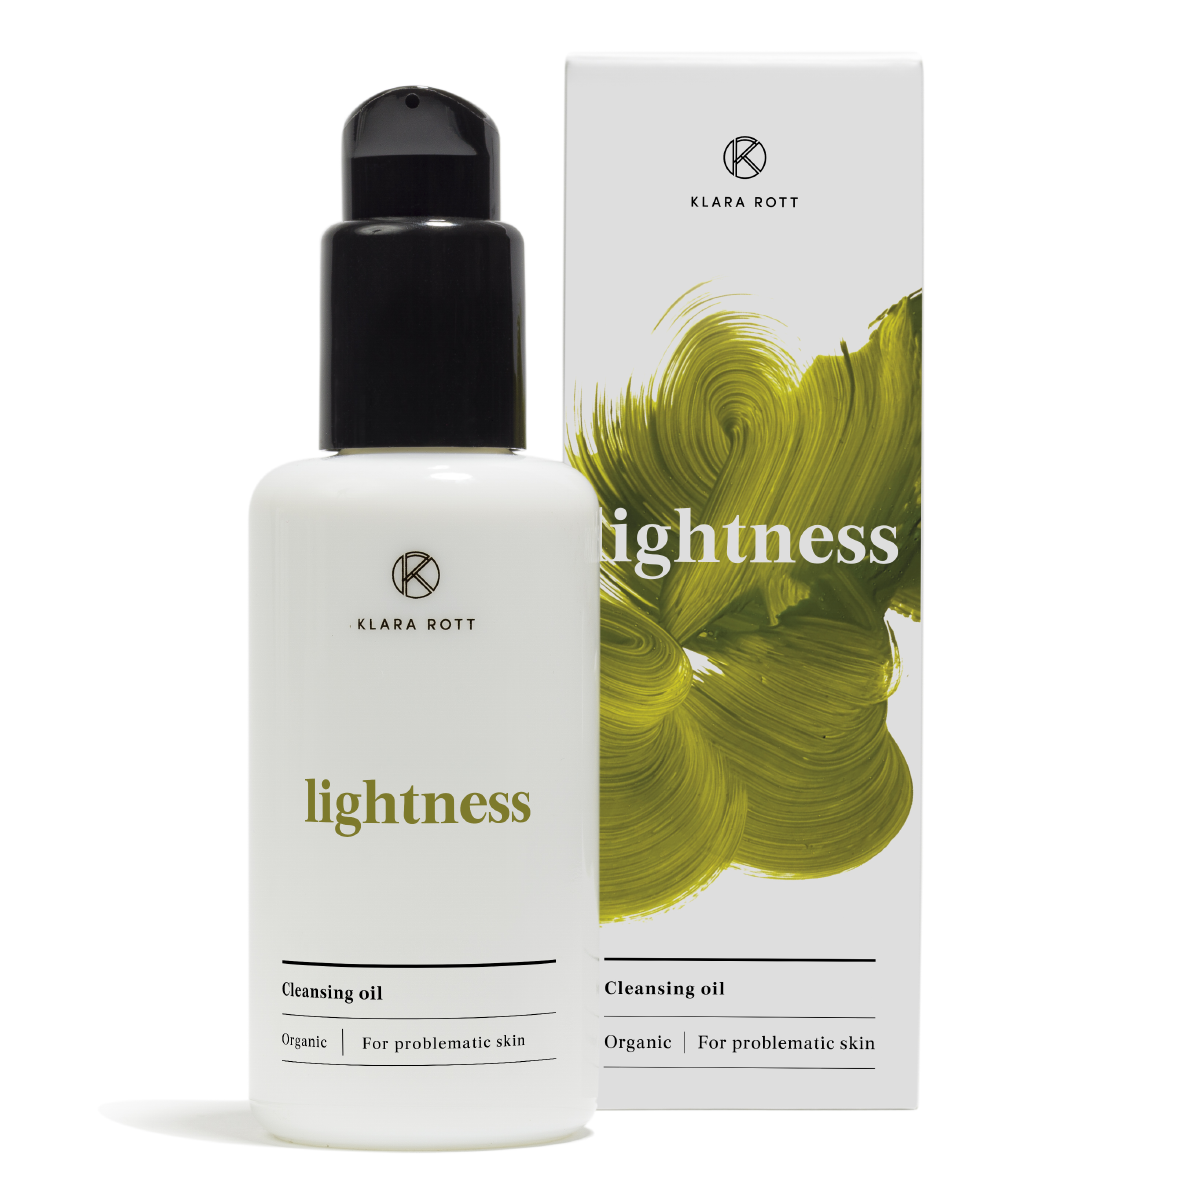 Lightness - Cleansing oil for problematic skin 